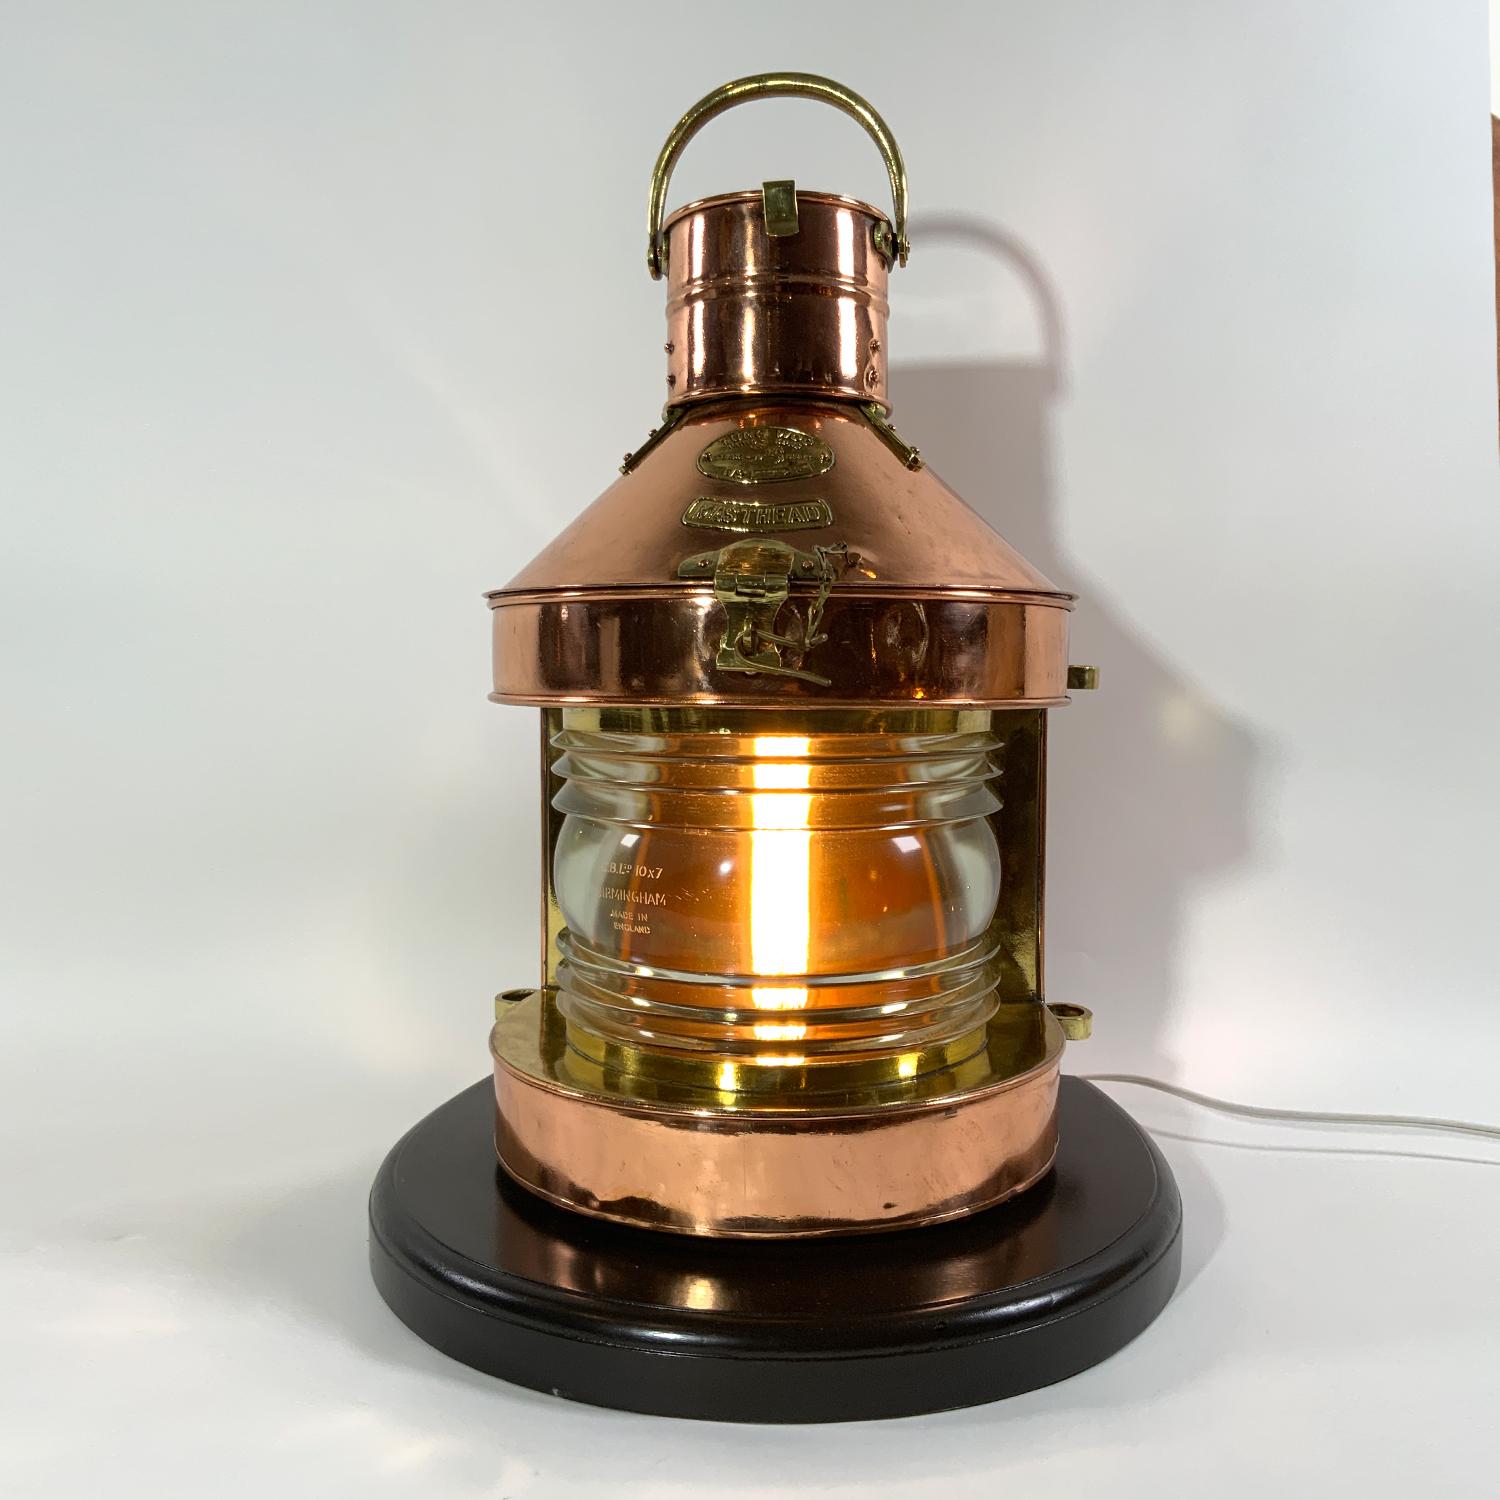 High quality solid copper and brass trimmed masthead lantern. With maker's badge from Tung Woo Masthead and Serial No. M123. Thick Fresnel lens, hinged top vented chimney, brass carry handle. Mounted to a thick wood base. Meticulously polished and